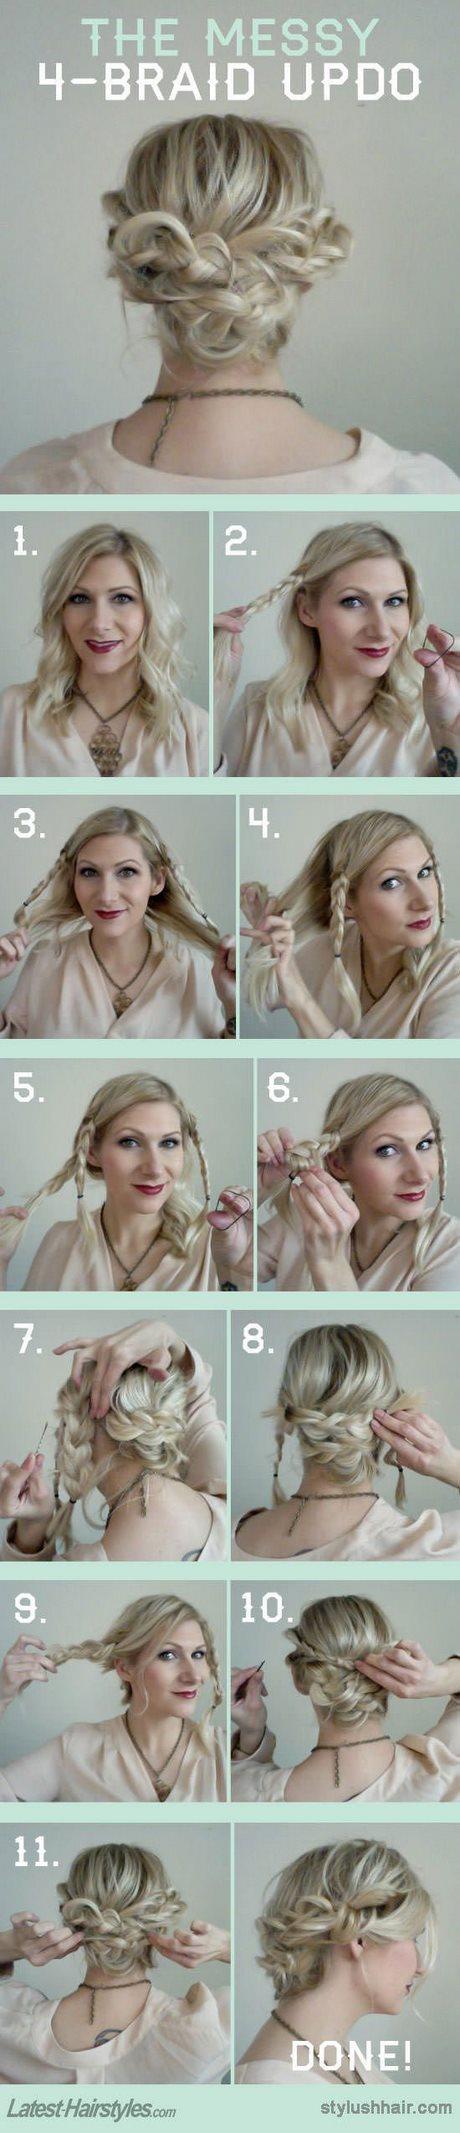 Easy up styles for shoulder length hair easy-up-styles-for-shoulder-length-hair-02_5